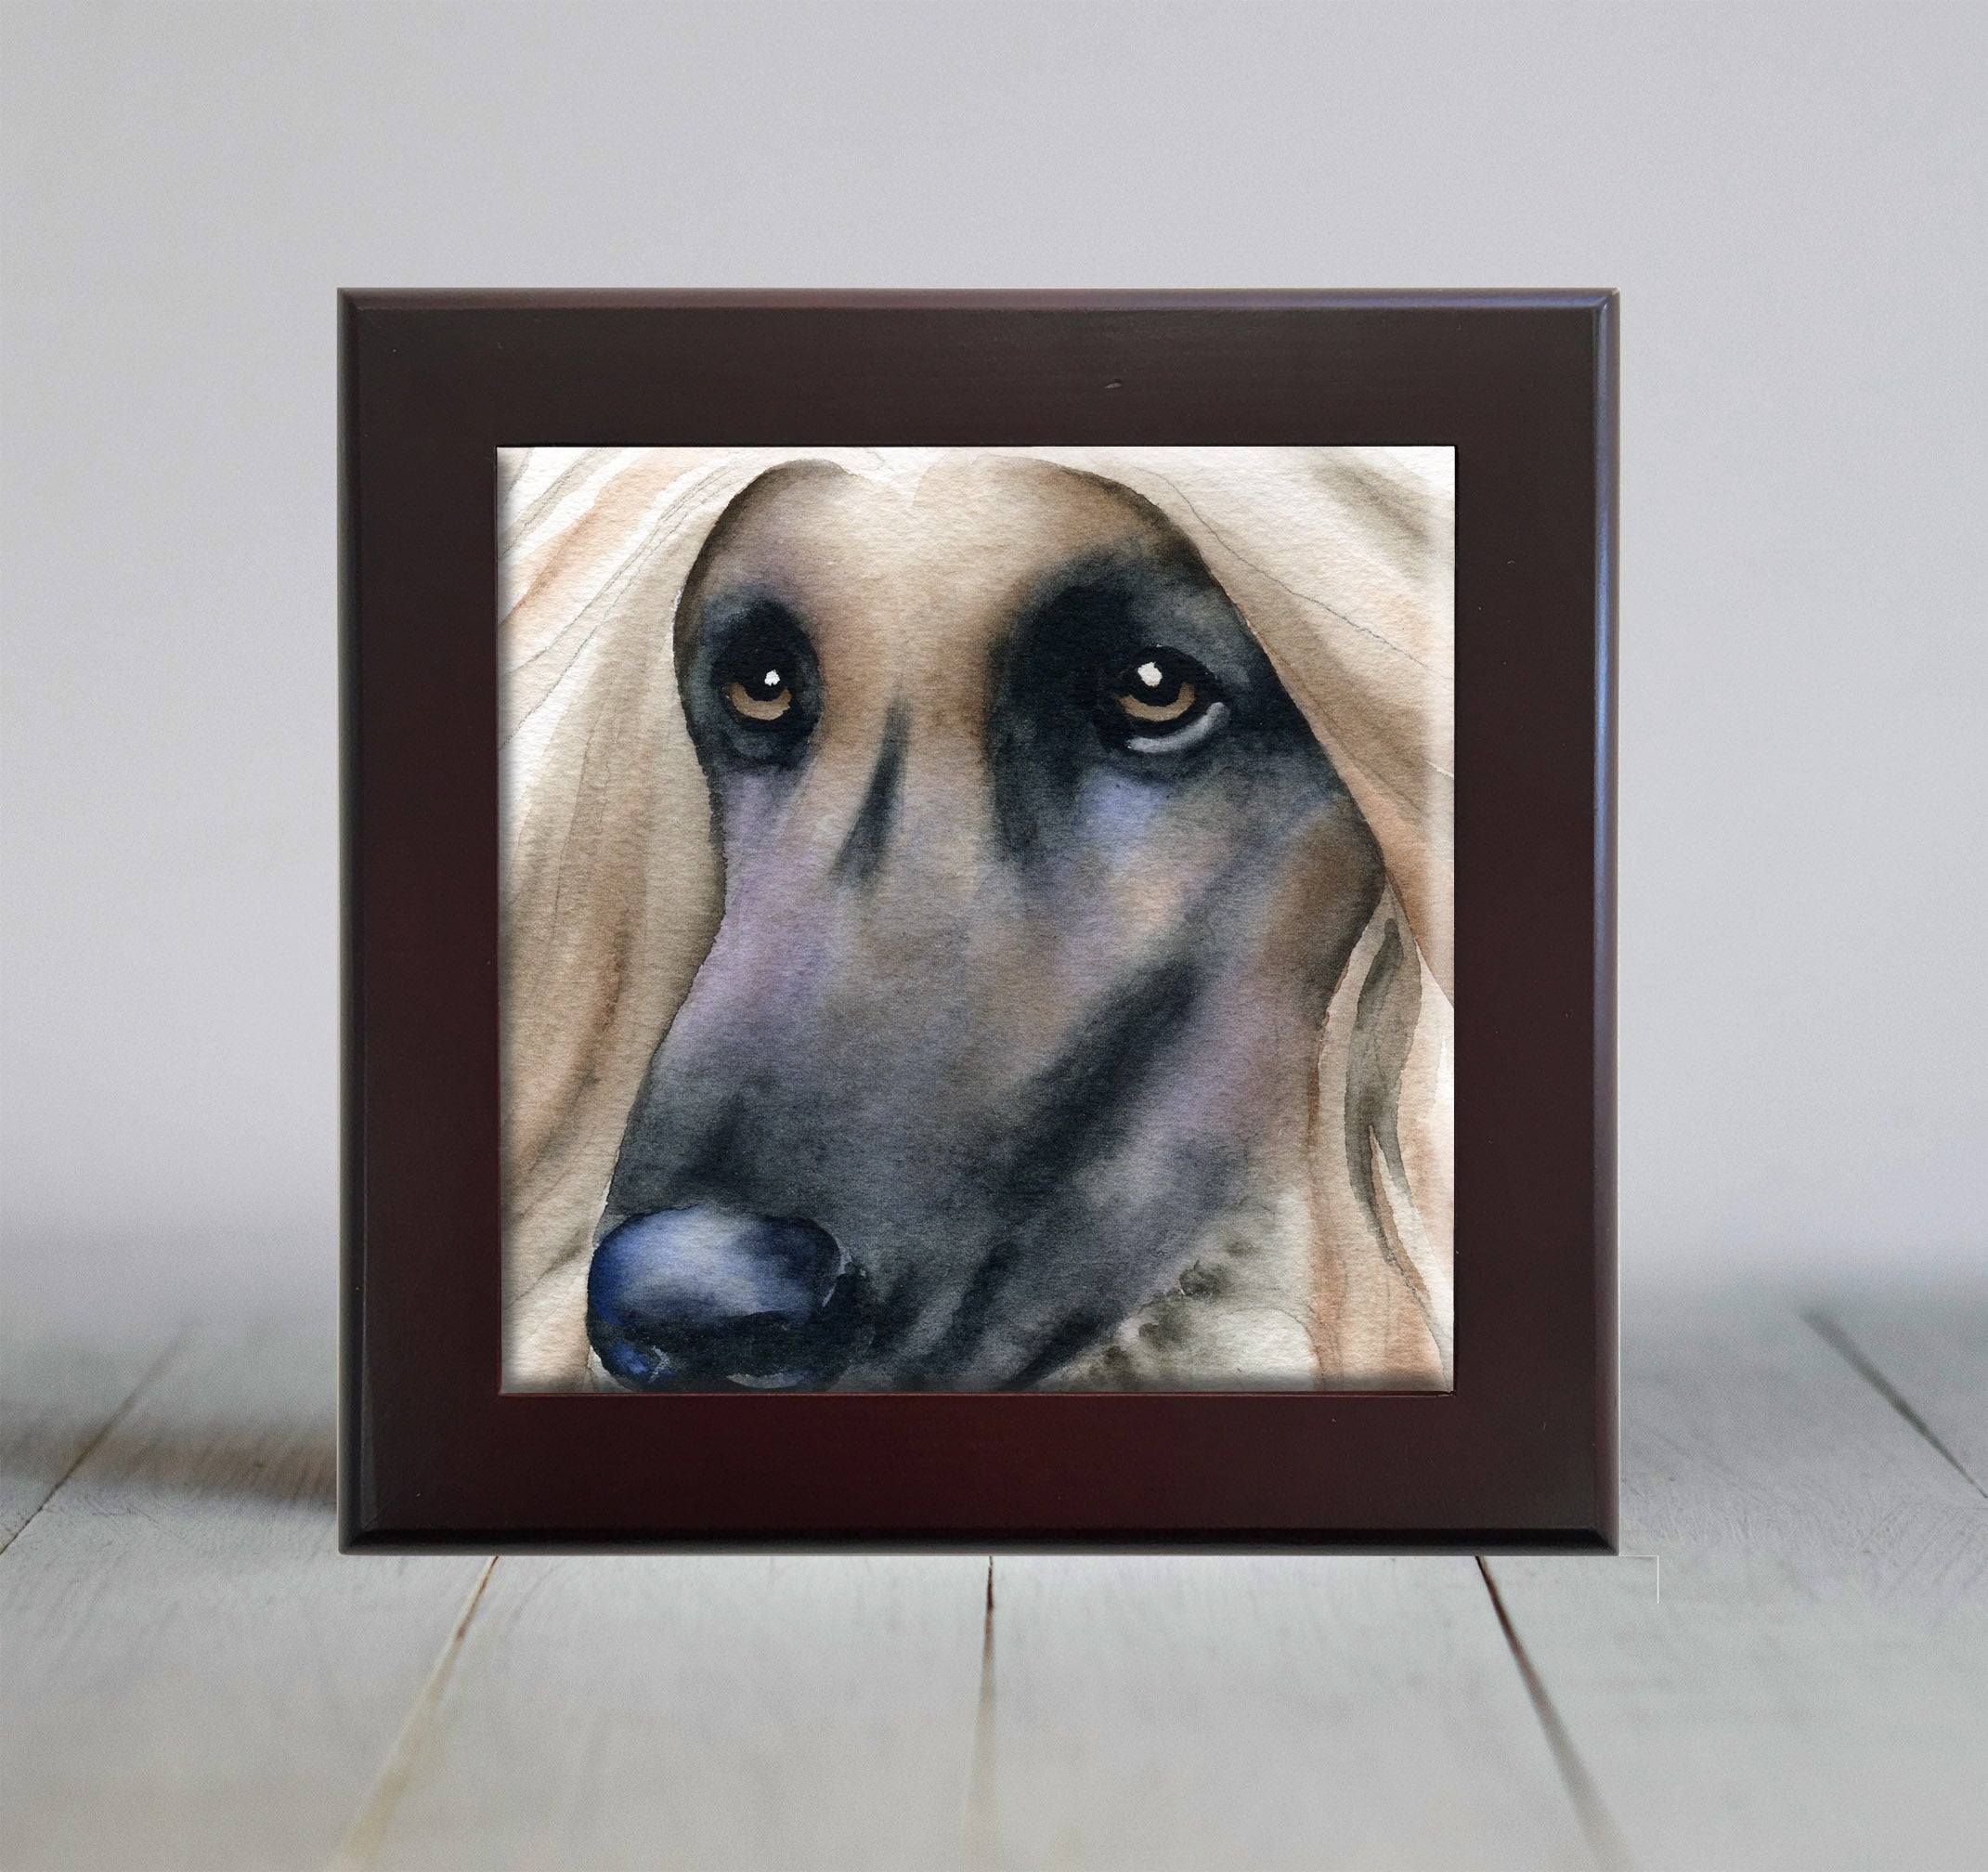 Afghan Hound Contemporary Watercolor Dog Art Decorative Tile by Artist DJ Rogers